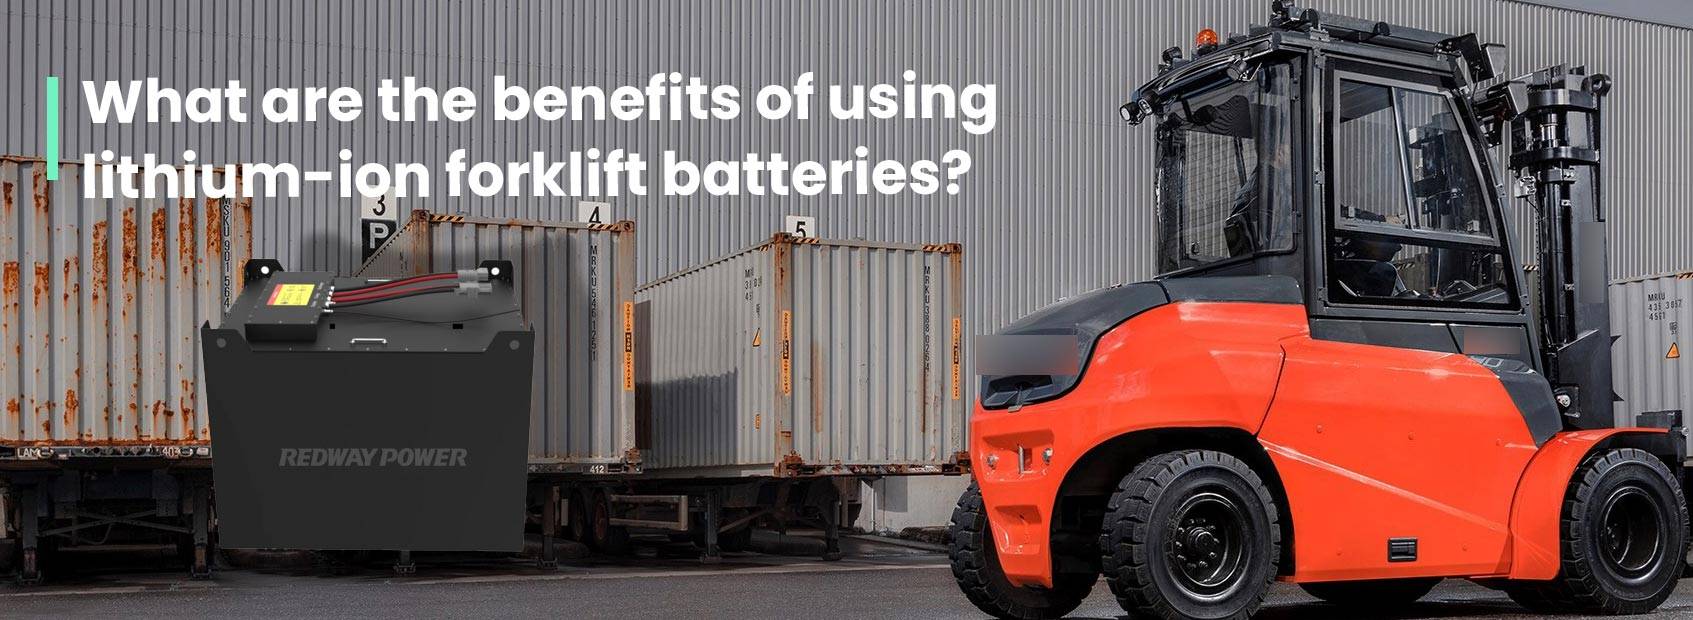 What are the benefits of using lithium-ion forklift batteries?